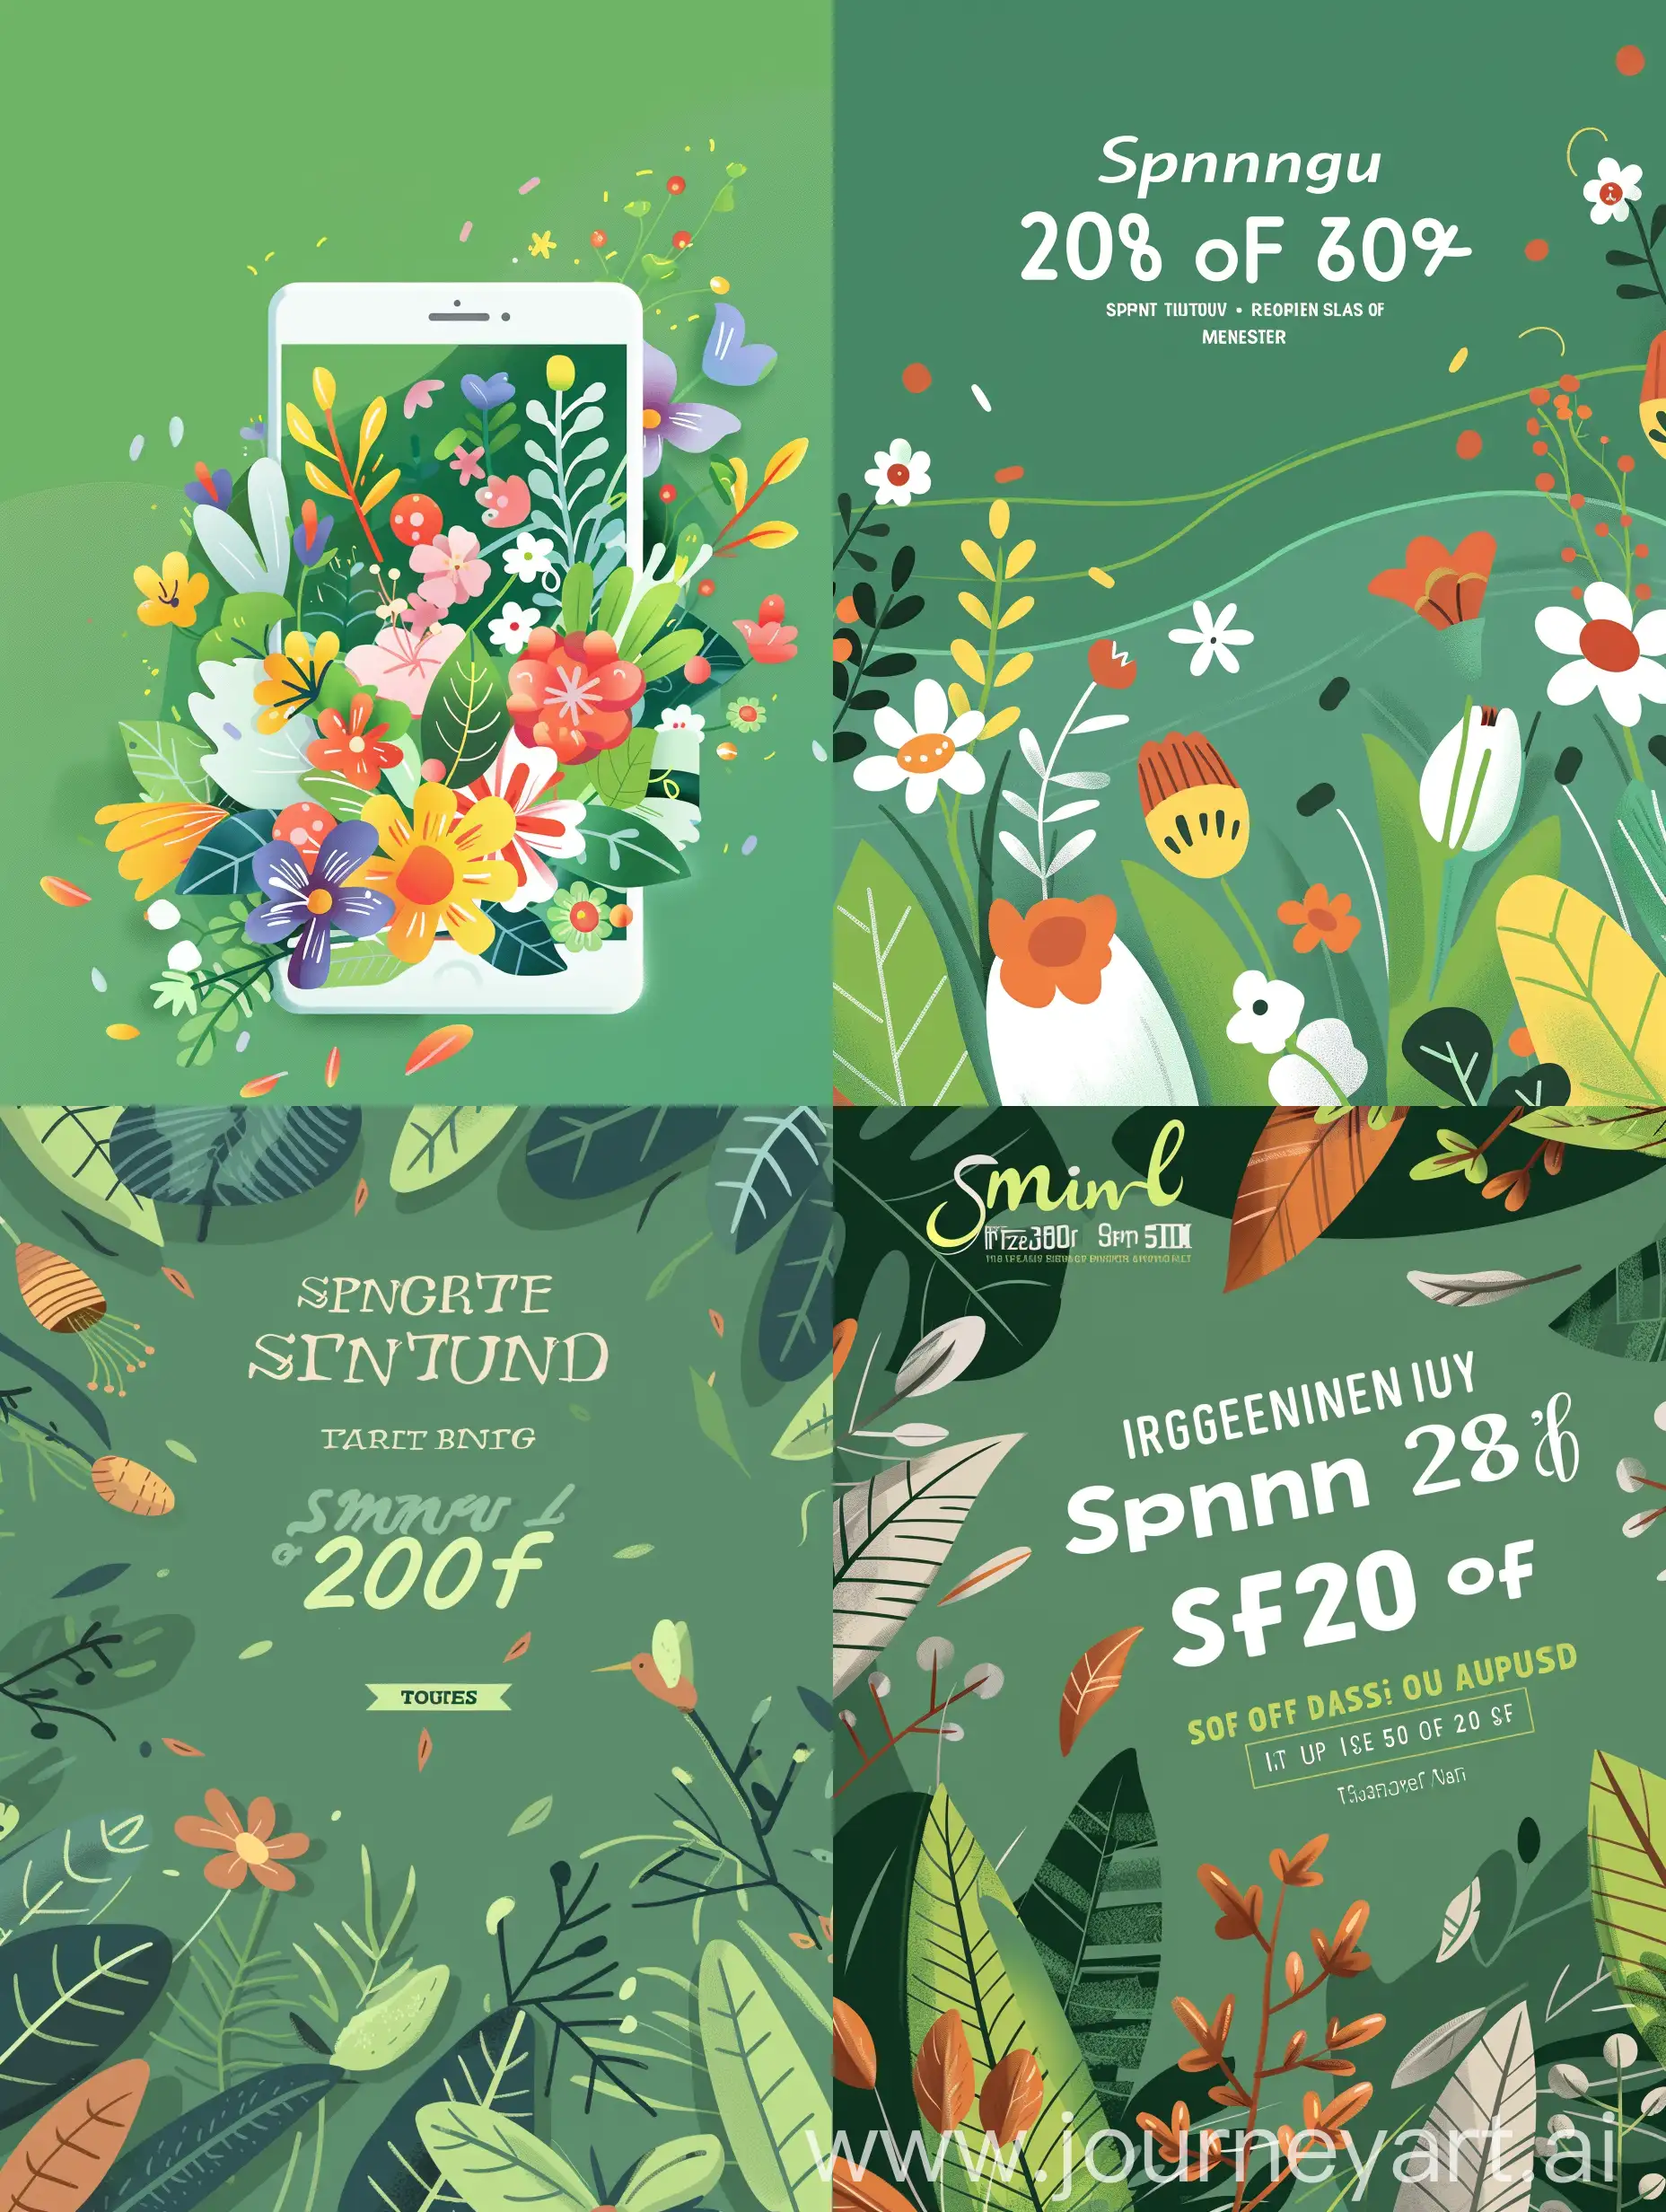 Spring-Enrollment-Save-20-on-Tuition-with-Vibrant-Green-Background